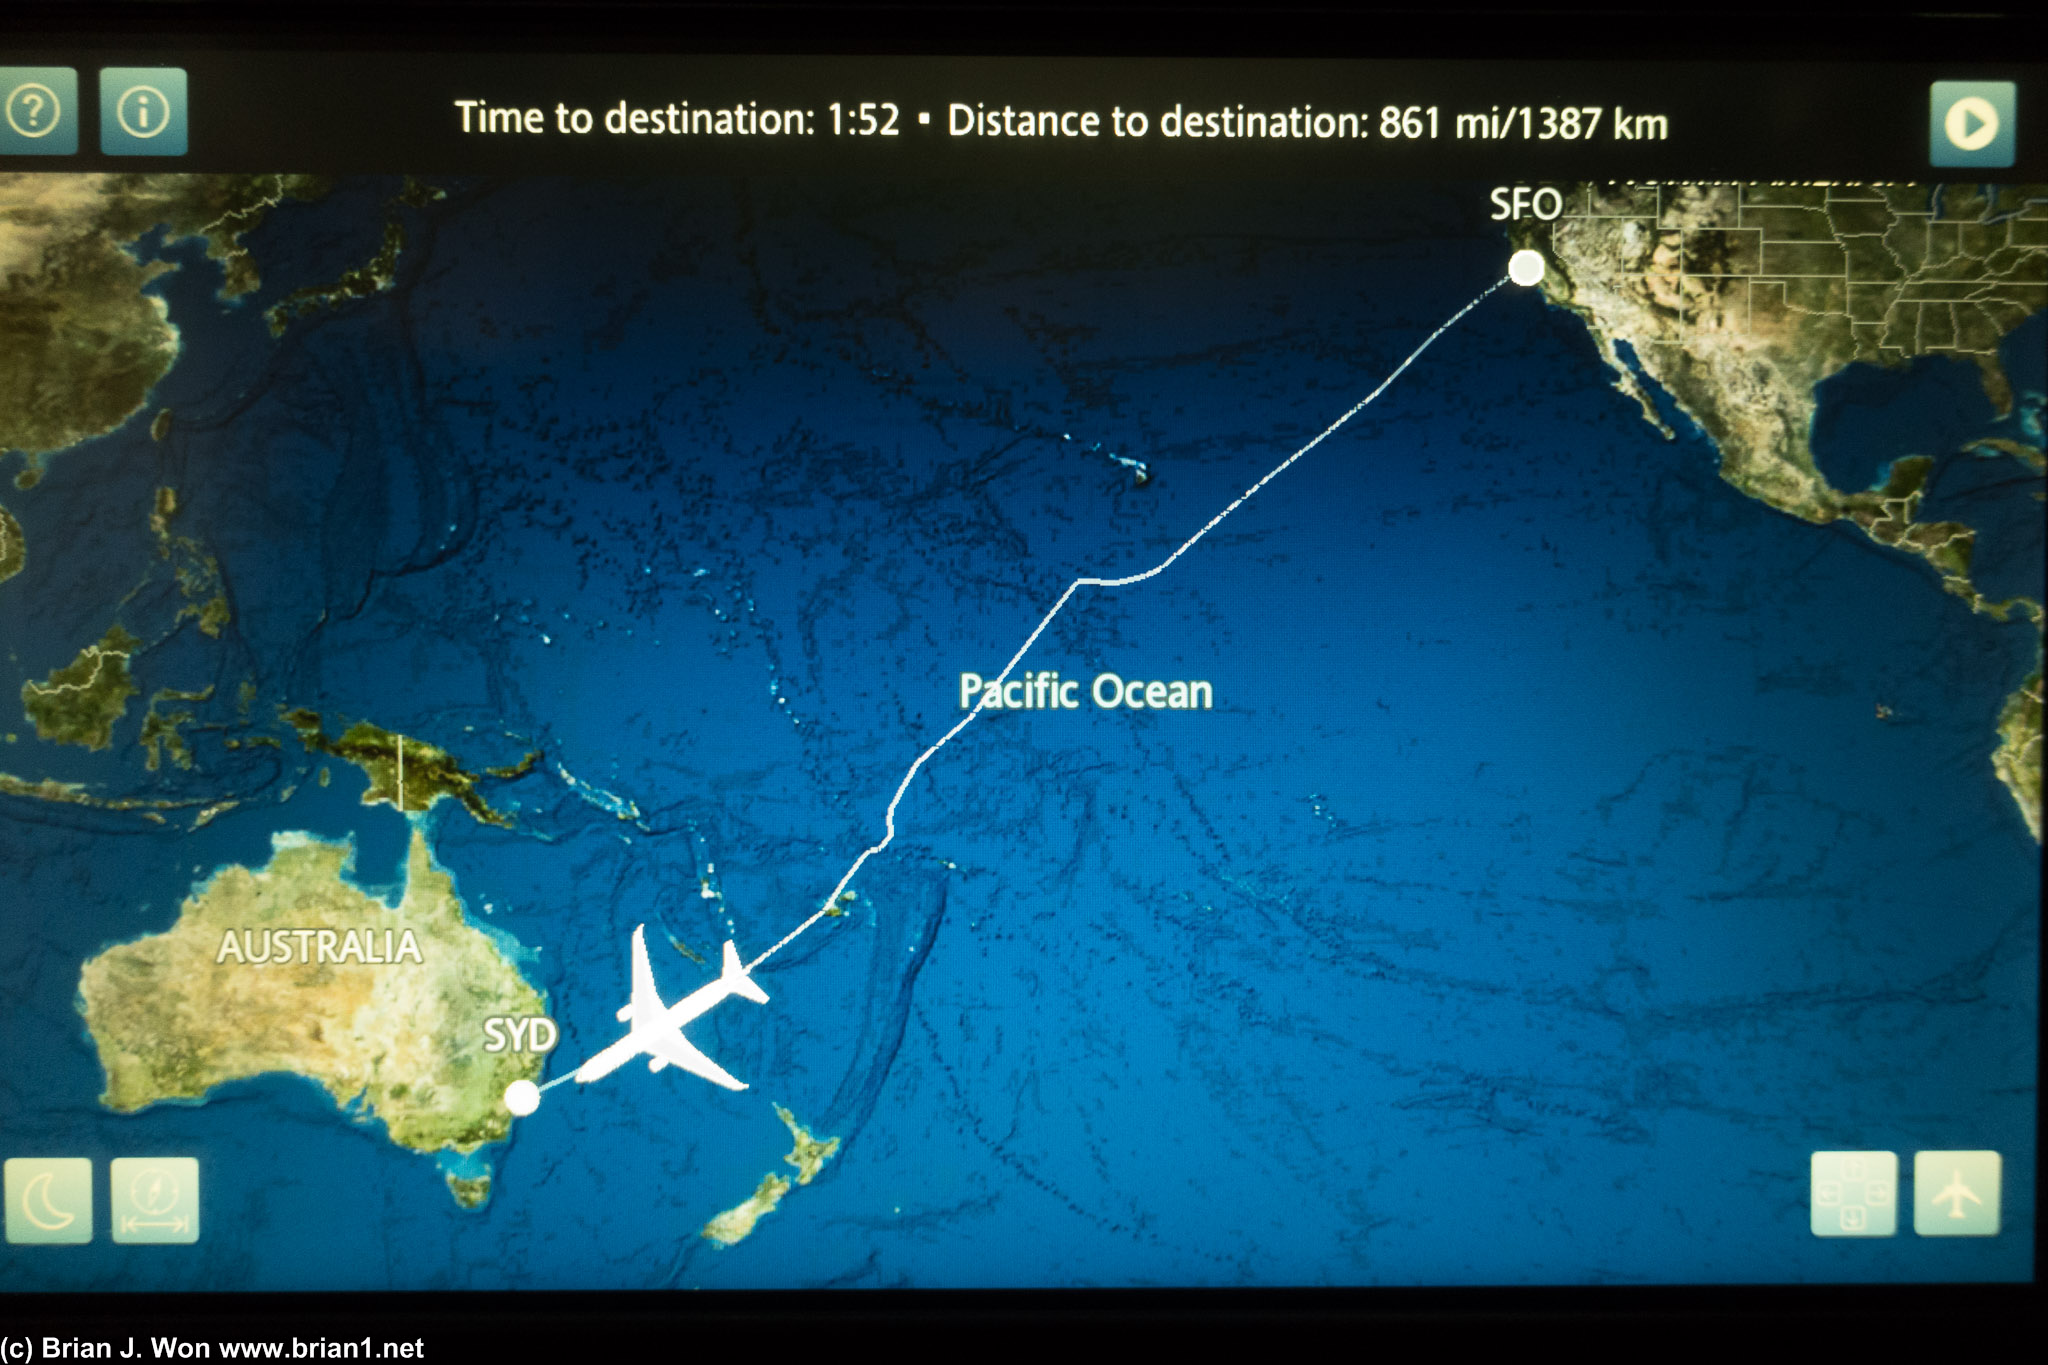 One messy flight path as the pilot tried to avoid the worst of the turbulence across the Pacific.